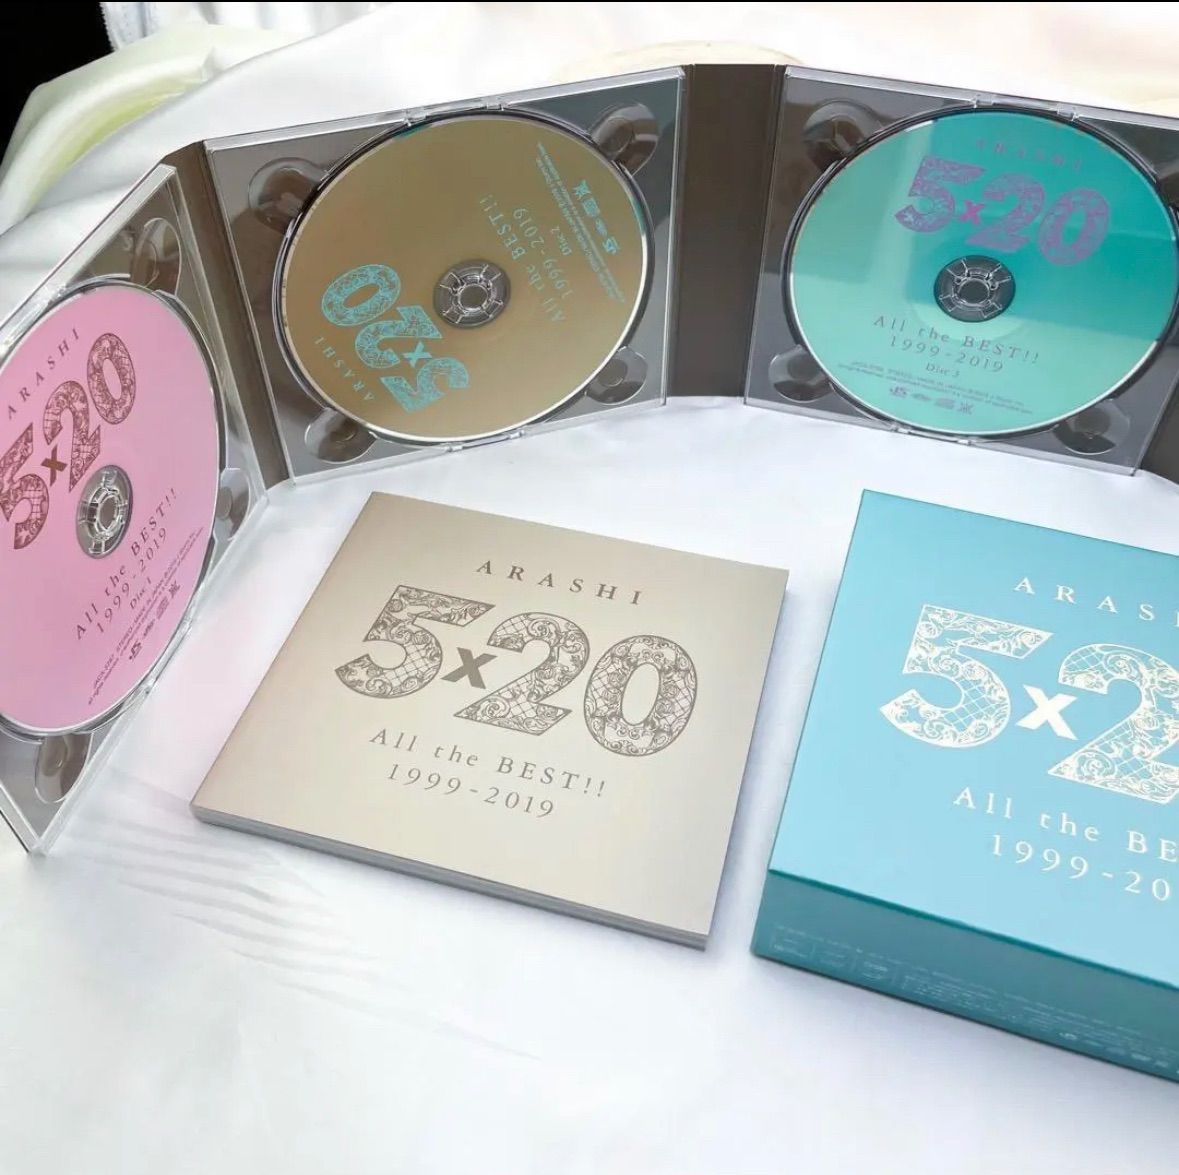 5×20 All the BEST!! This is 嵐 初回盤セット DVD D - メルカリ